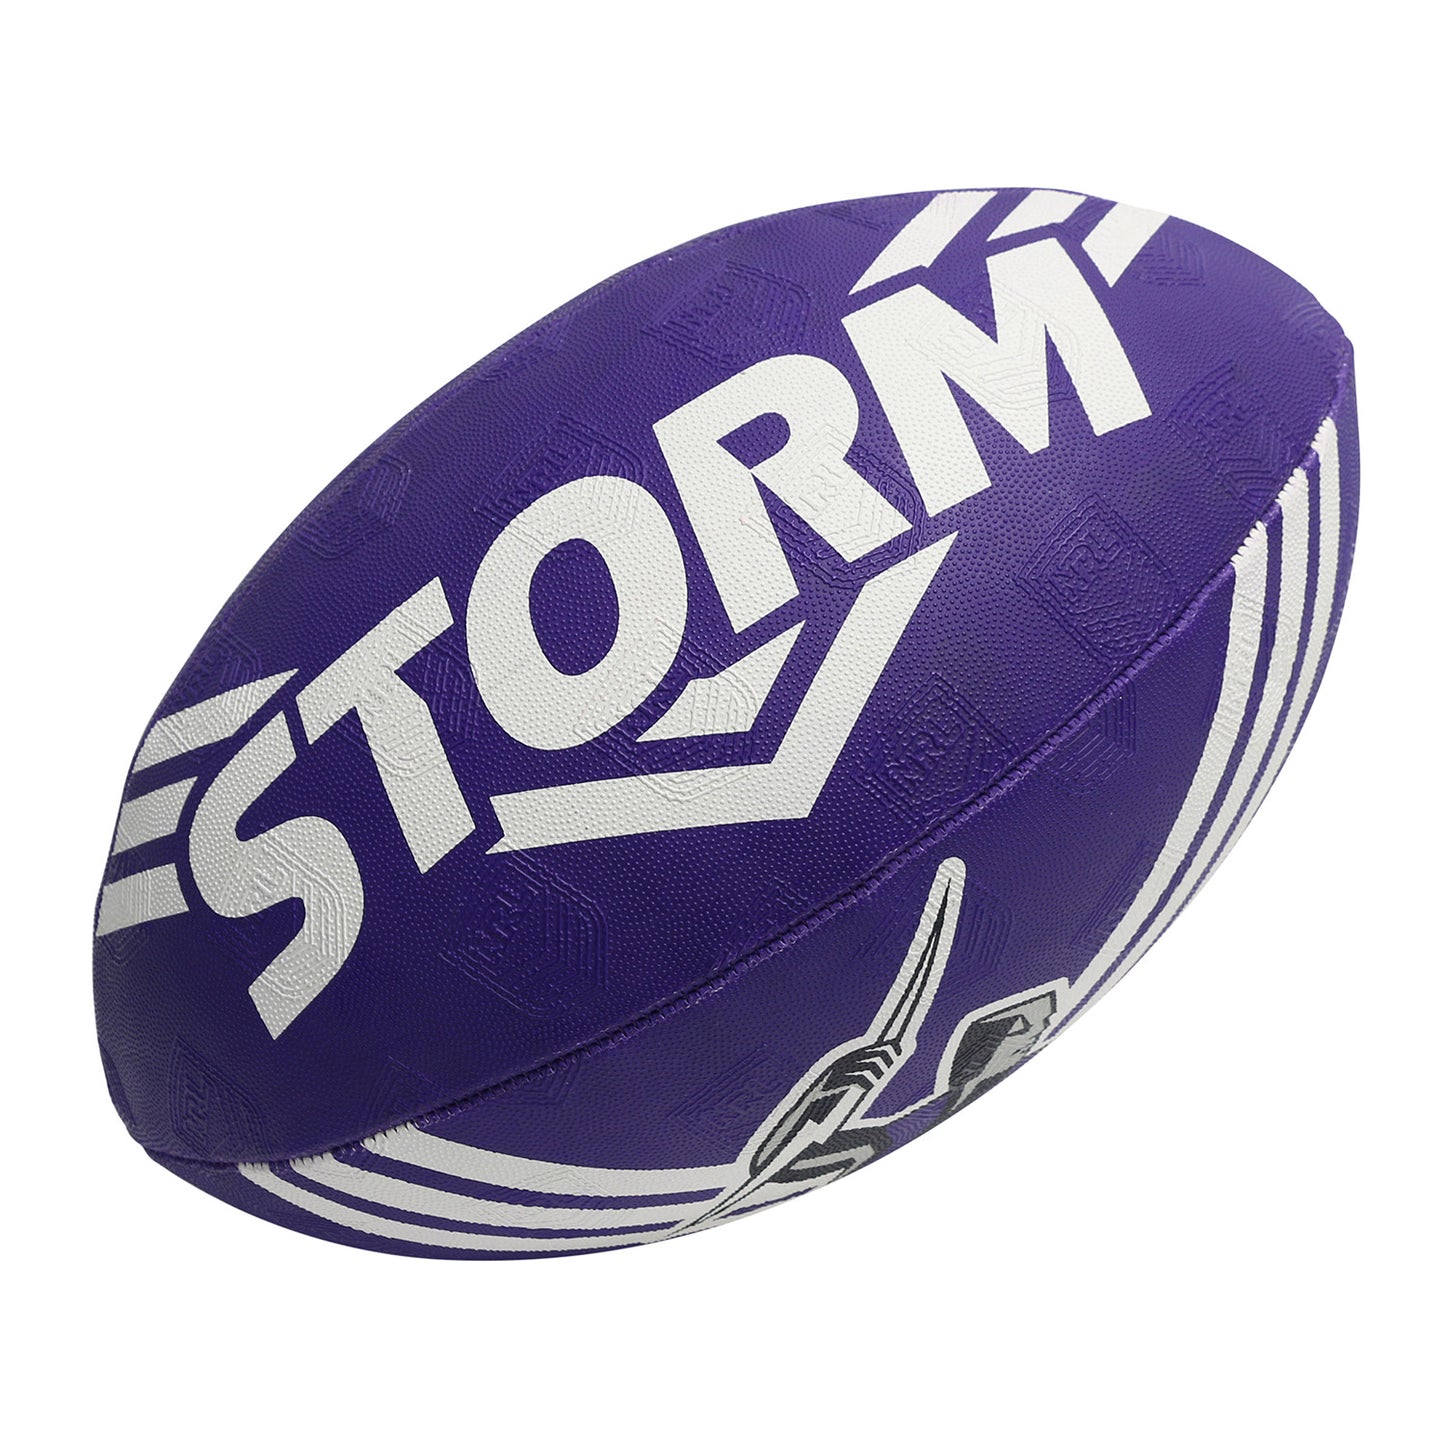 Melbourne Storm Supporter Ball